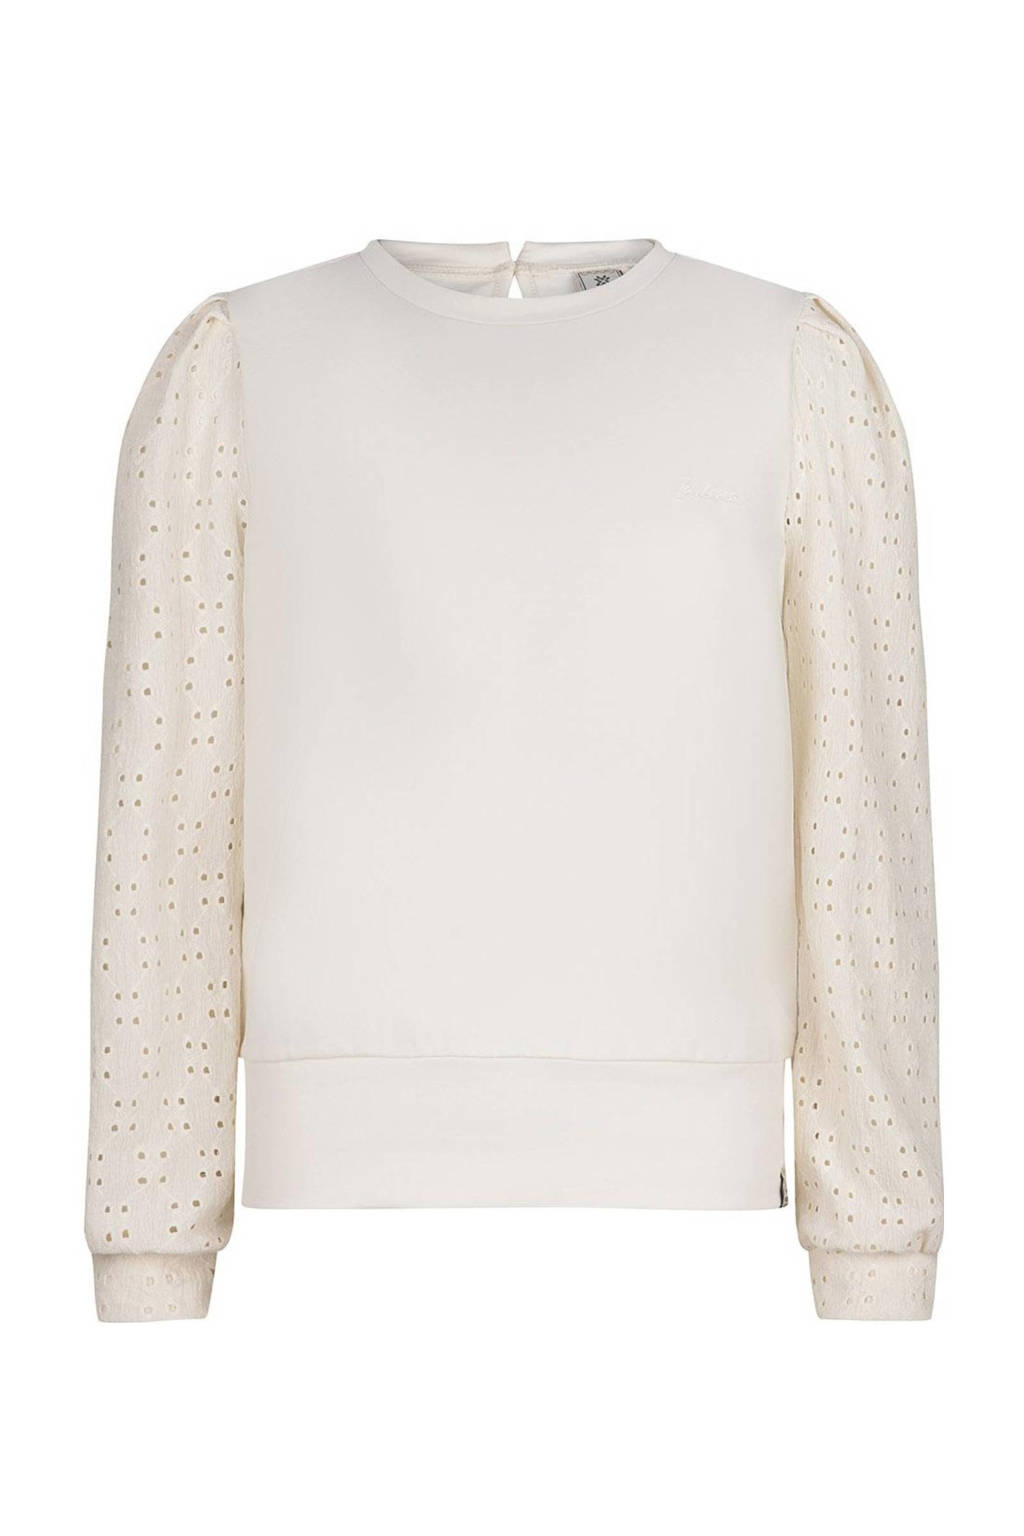 Indian Blue Jeans sweater offwhite